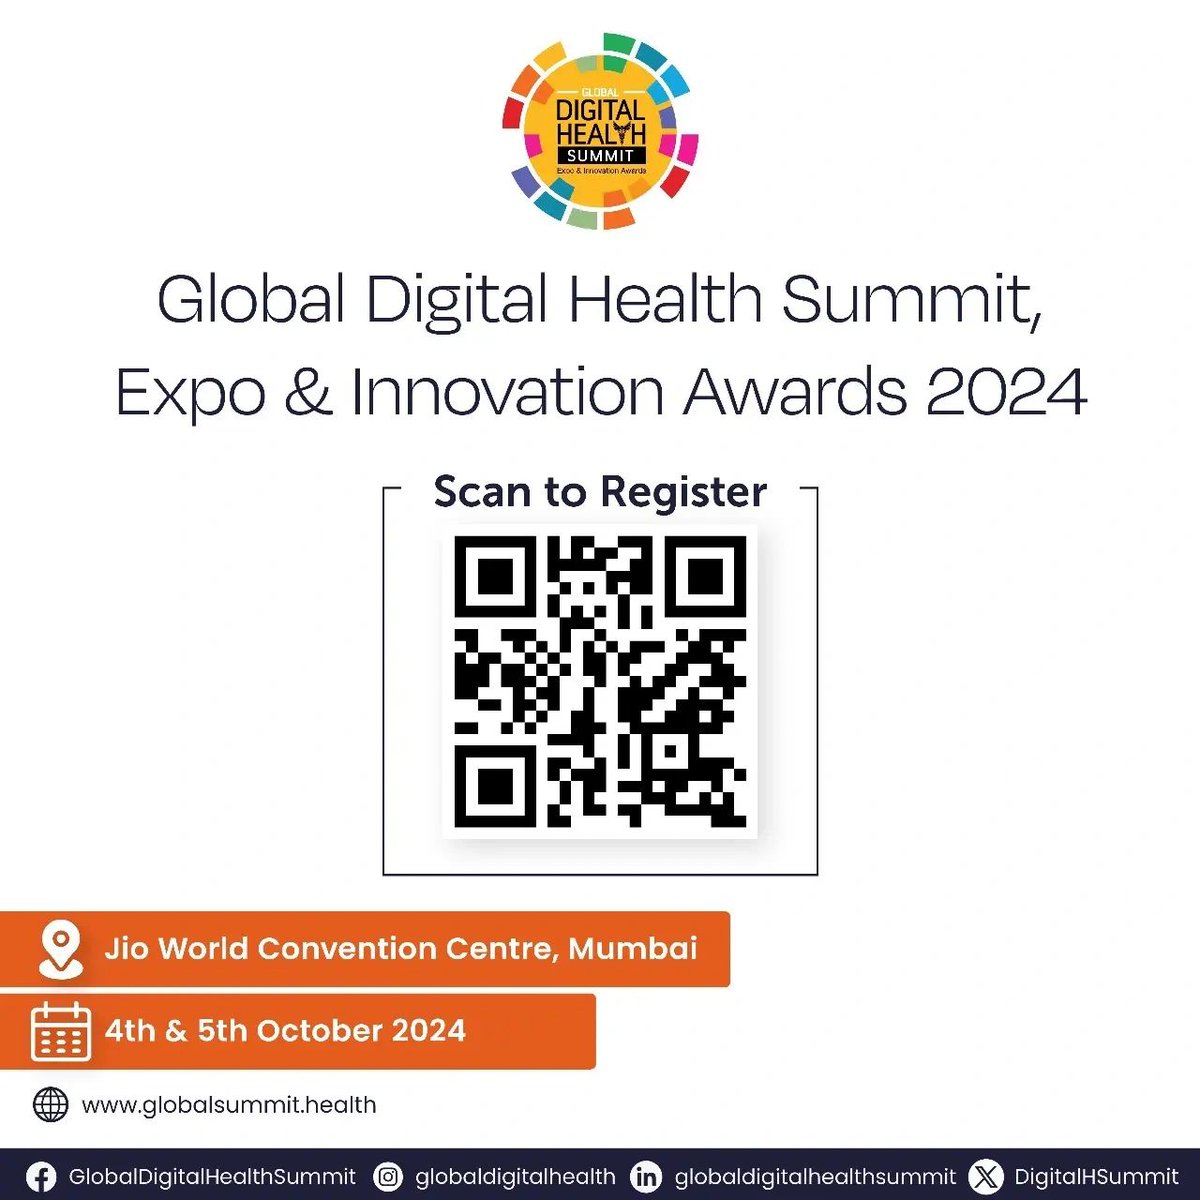 Registration is open for The Global Digital Health Summit, a two-day event where you will find #lectures, #panel discussions, and networking sessions revolving around everything #digital #health. Scan the QR code in the picture below to participate 👇